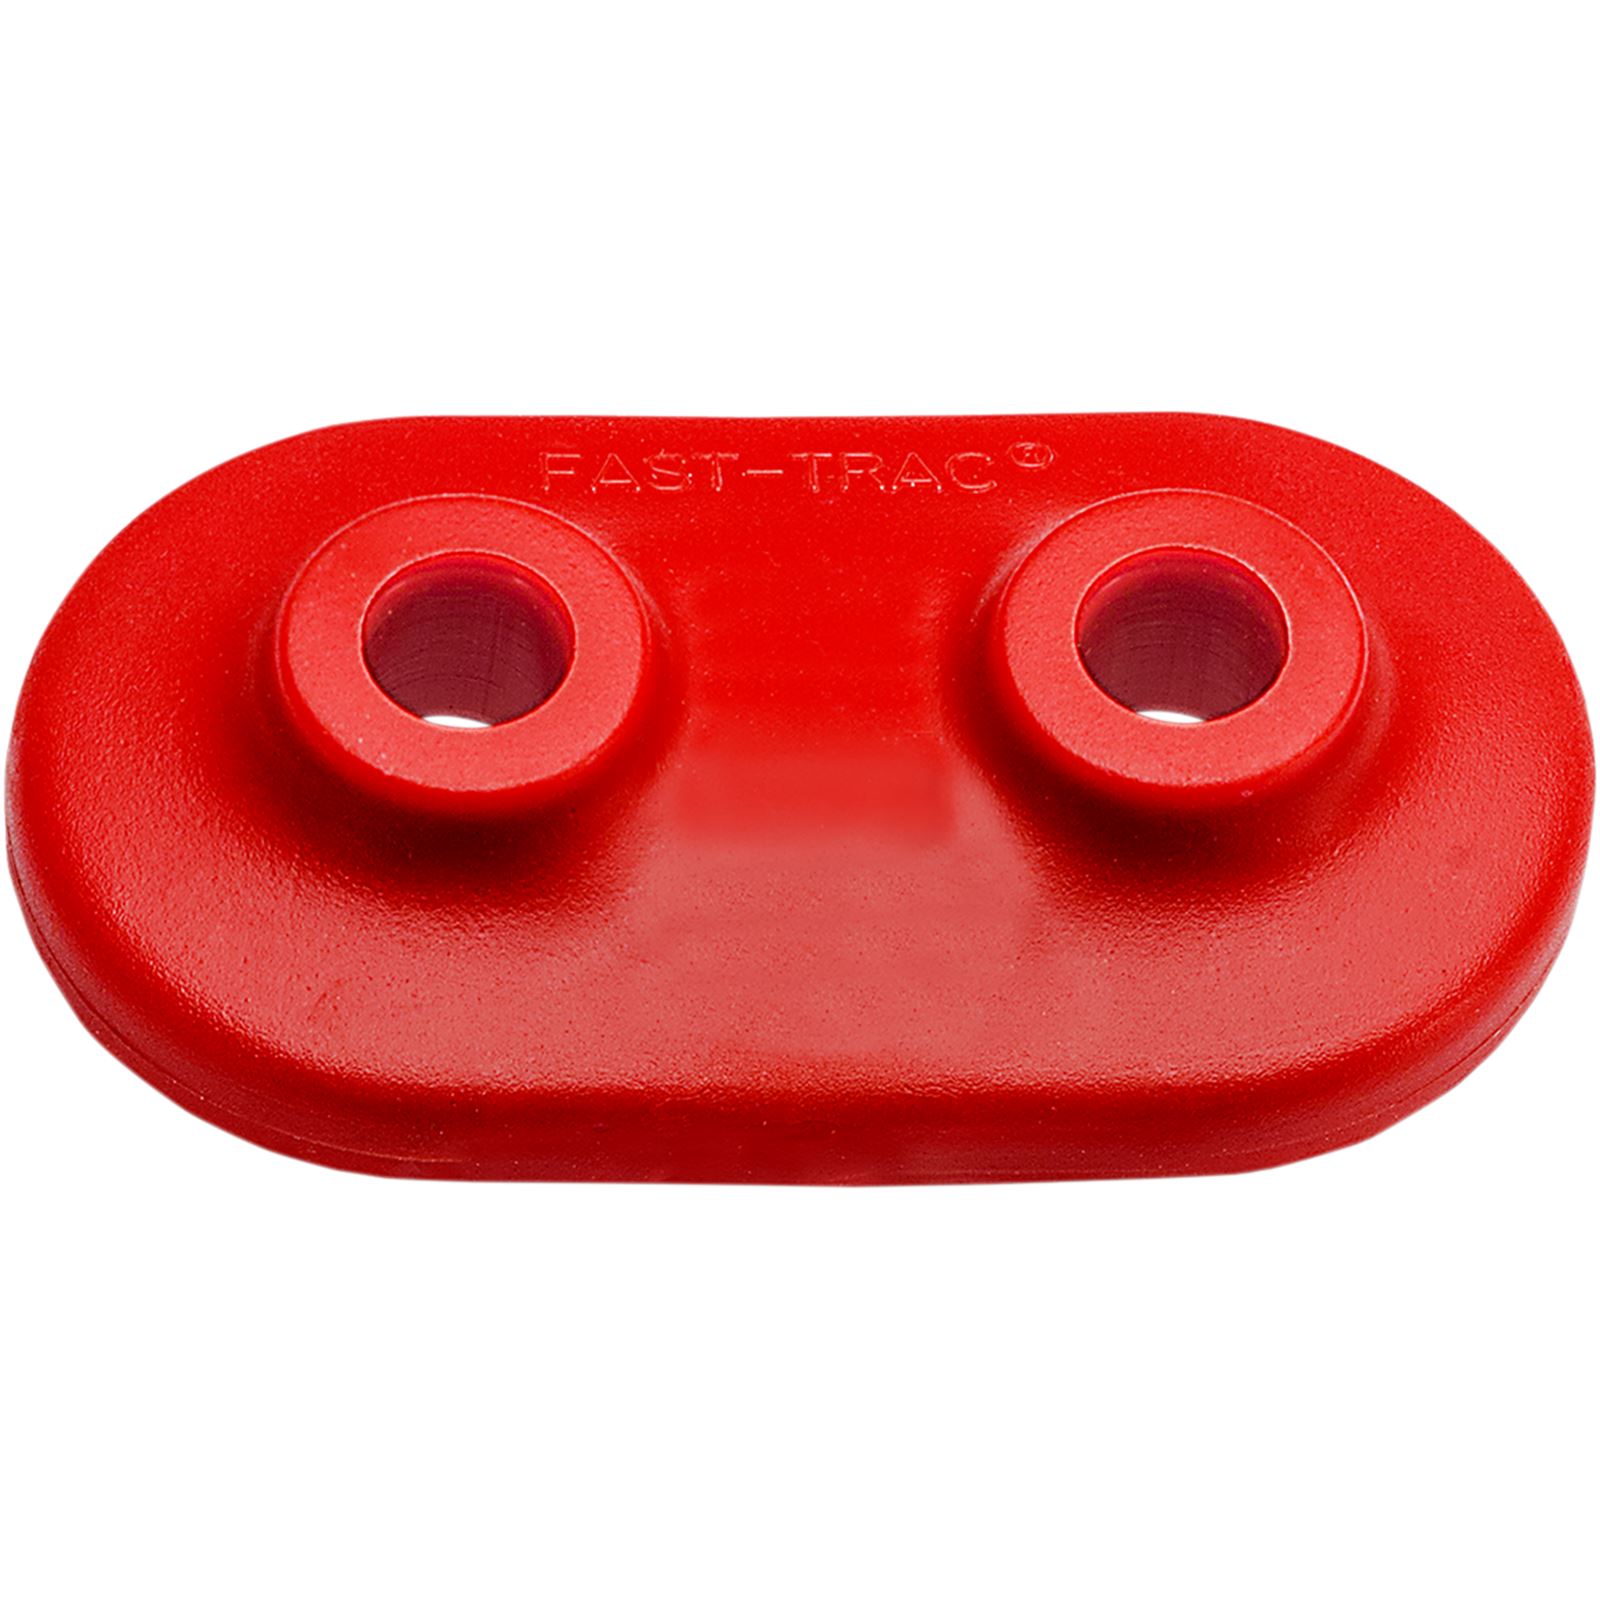 Fast-Trac Backer Plates - Red - Double - 48/Pack